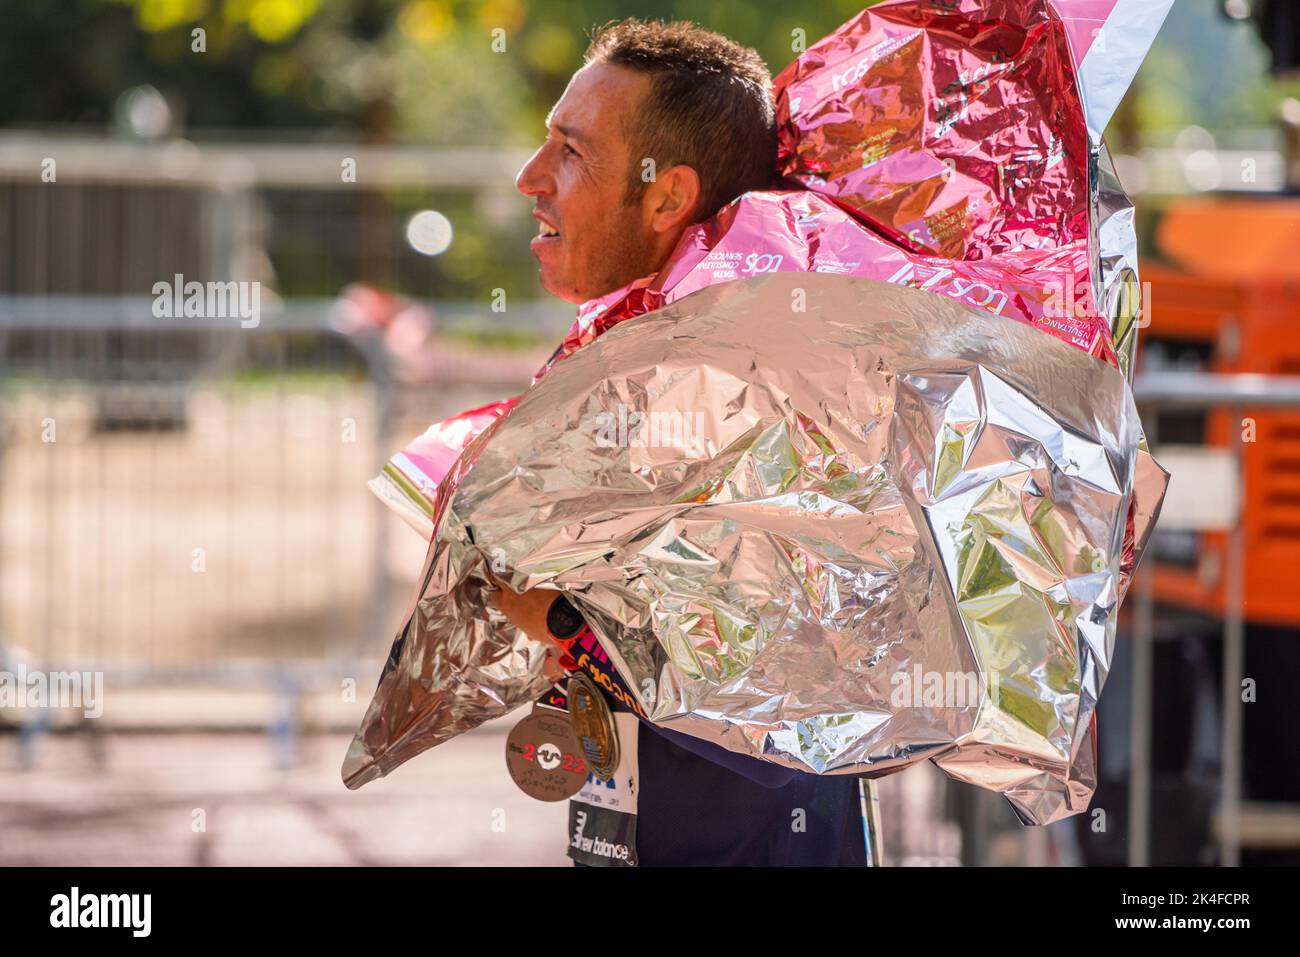 London UK. 2 October 2022 .  A marathon runner  wrapped in a  foil blanket after crossing  the finishing line at The Mall. More than  40,000 athletes including  elite  runners, club runners and fun runners   take  part in the London Marathon sponsored by TCS Tata Consultancy Services over a 26.2 mile course.Credit: amer ghazzal/Alamy Live News. Stock Photo